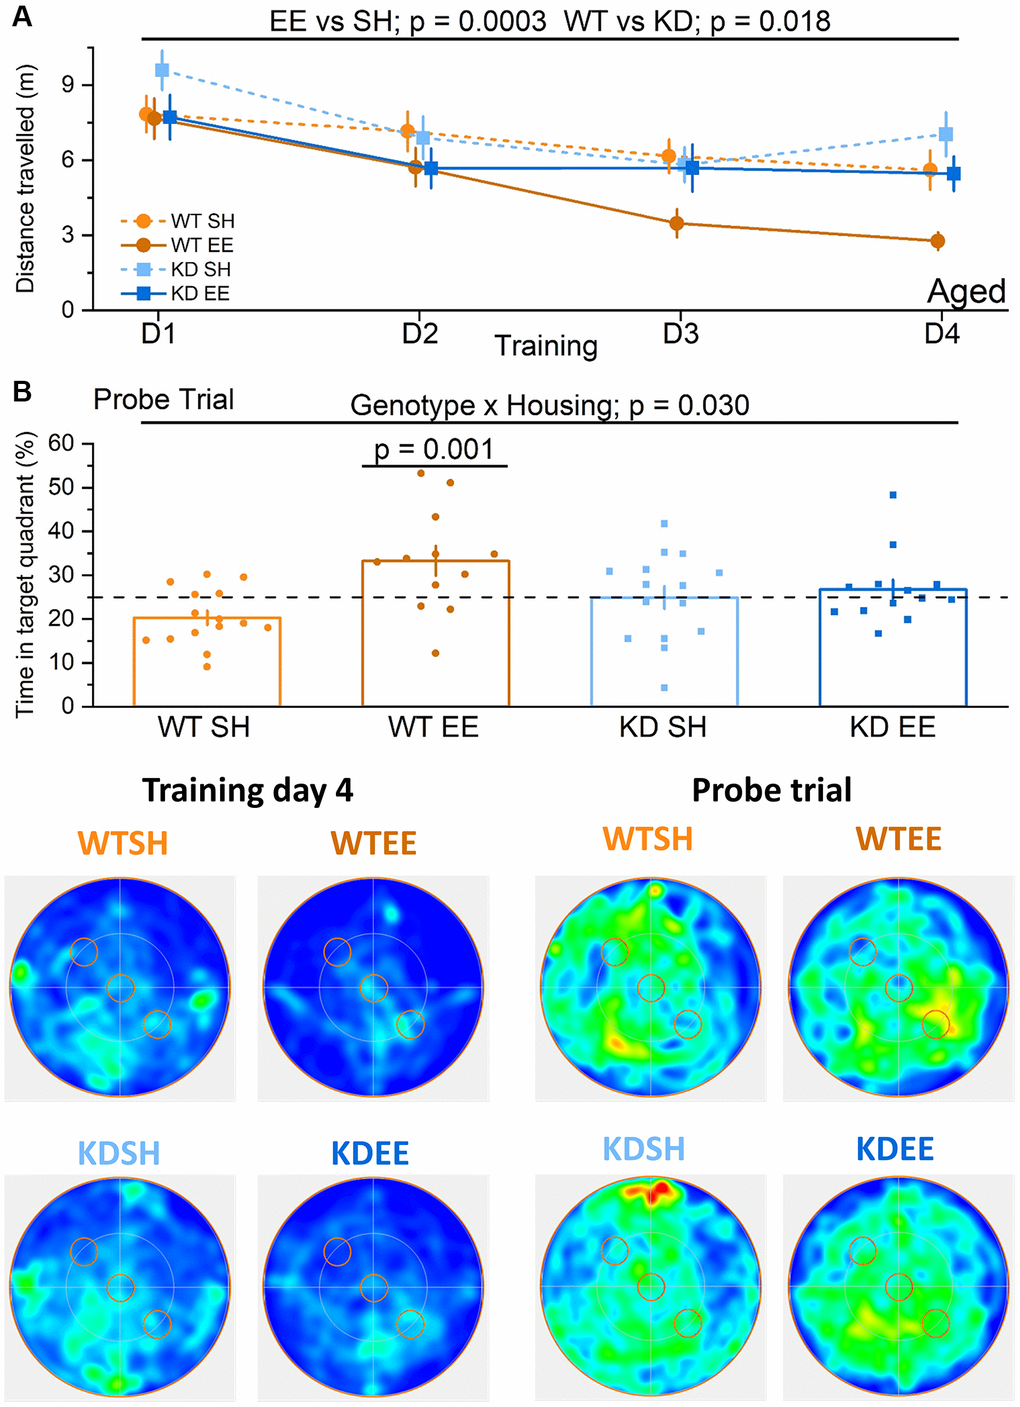 Enrichment of aged mice improves hippocampus-dependent reference memory via MSK1. No differences were observed across groups in the visual cue version of the test (Genotype: F(1,51) = 0.001, p = 0.970; Housing: F(1,51) = 0.37, p = 0.570; Genotype x Housing F(1,51) = 2.26, p = 0.140; data not shown) suggesting comparable levels of visual acuity, swimming ability and motivation to navigate to the platform. (A) In the Aged groups the enriched WT mice were the best performers and did not show the age-related impairment seen in standard-housed WT mice. The RM-ANOVA analysis on the distance travelled to reach the escape platform showed a significant effect of Session F(3,153) = 12.63, p p = 0.136. The analysis also showed a main effect of the Housing (F(1,51) = 15.23 p = 0.0003) where enriched mice performed better than standard-housed mice, and of Genotype (F(1,51) = 6.00 p = 0.018) where WT mice performed better than MSK1 KD mice. Although there was no significant interaction, on training day 3 and 4 the WT enriched mice clearly outperformed all the other groups. Data are presented as mean ± SEM. (B) On the probe trial the enriched WT mice had the best performance. The ANOVA showed a significant effect of Housing (F(1,51) = 8.84, p = 0.004), indicating a better performance of enriched mice, but the significant Genotype x Housing interaction (F(1,51) = 4.98, p = 0.030) and the Simple Main effects analysis showed that the difference between standard-housed mice and enriched mice was only significant in the WT mice (F(1,51) = 13.26, p = 0.001). Heatmaps below the graphs depict the arena occupancy for the mice of each group during the last day of training and the Probe trial. Individual data points are presented for each animal, with the bar graph representing the mean ± SEM of the data. Abbreviation: ns: not significant.